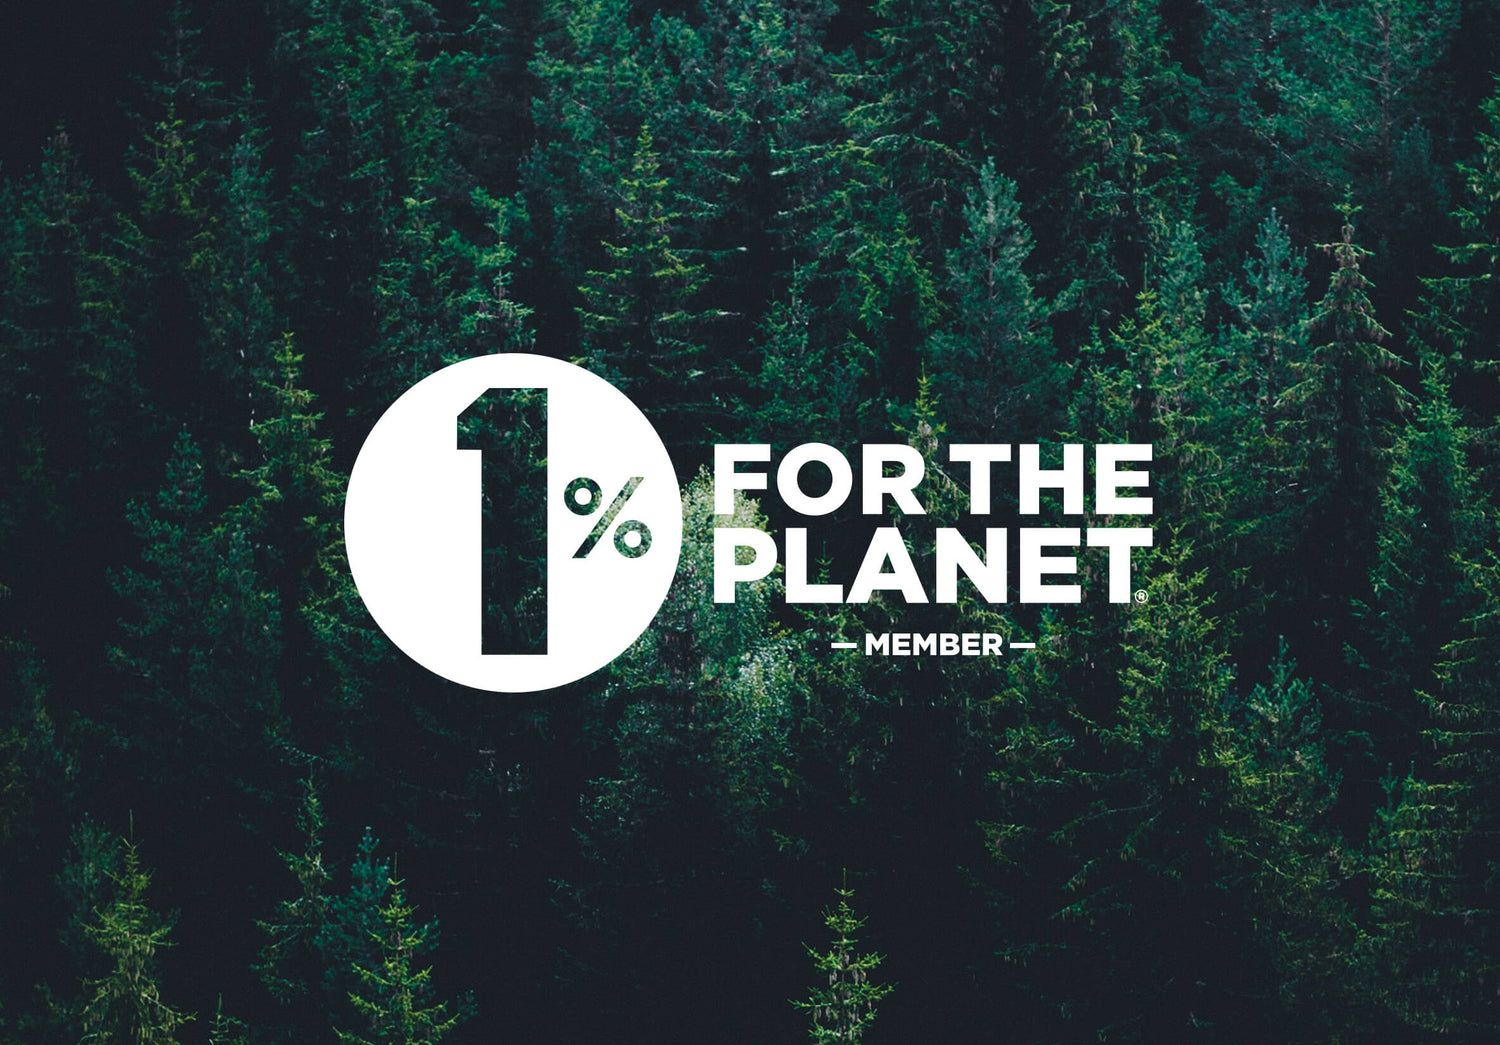 One percent for the planet logo on a dark green forest background